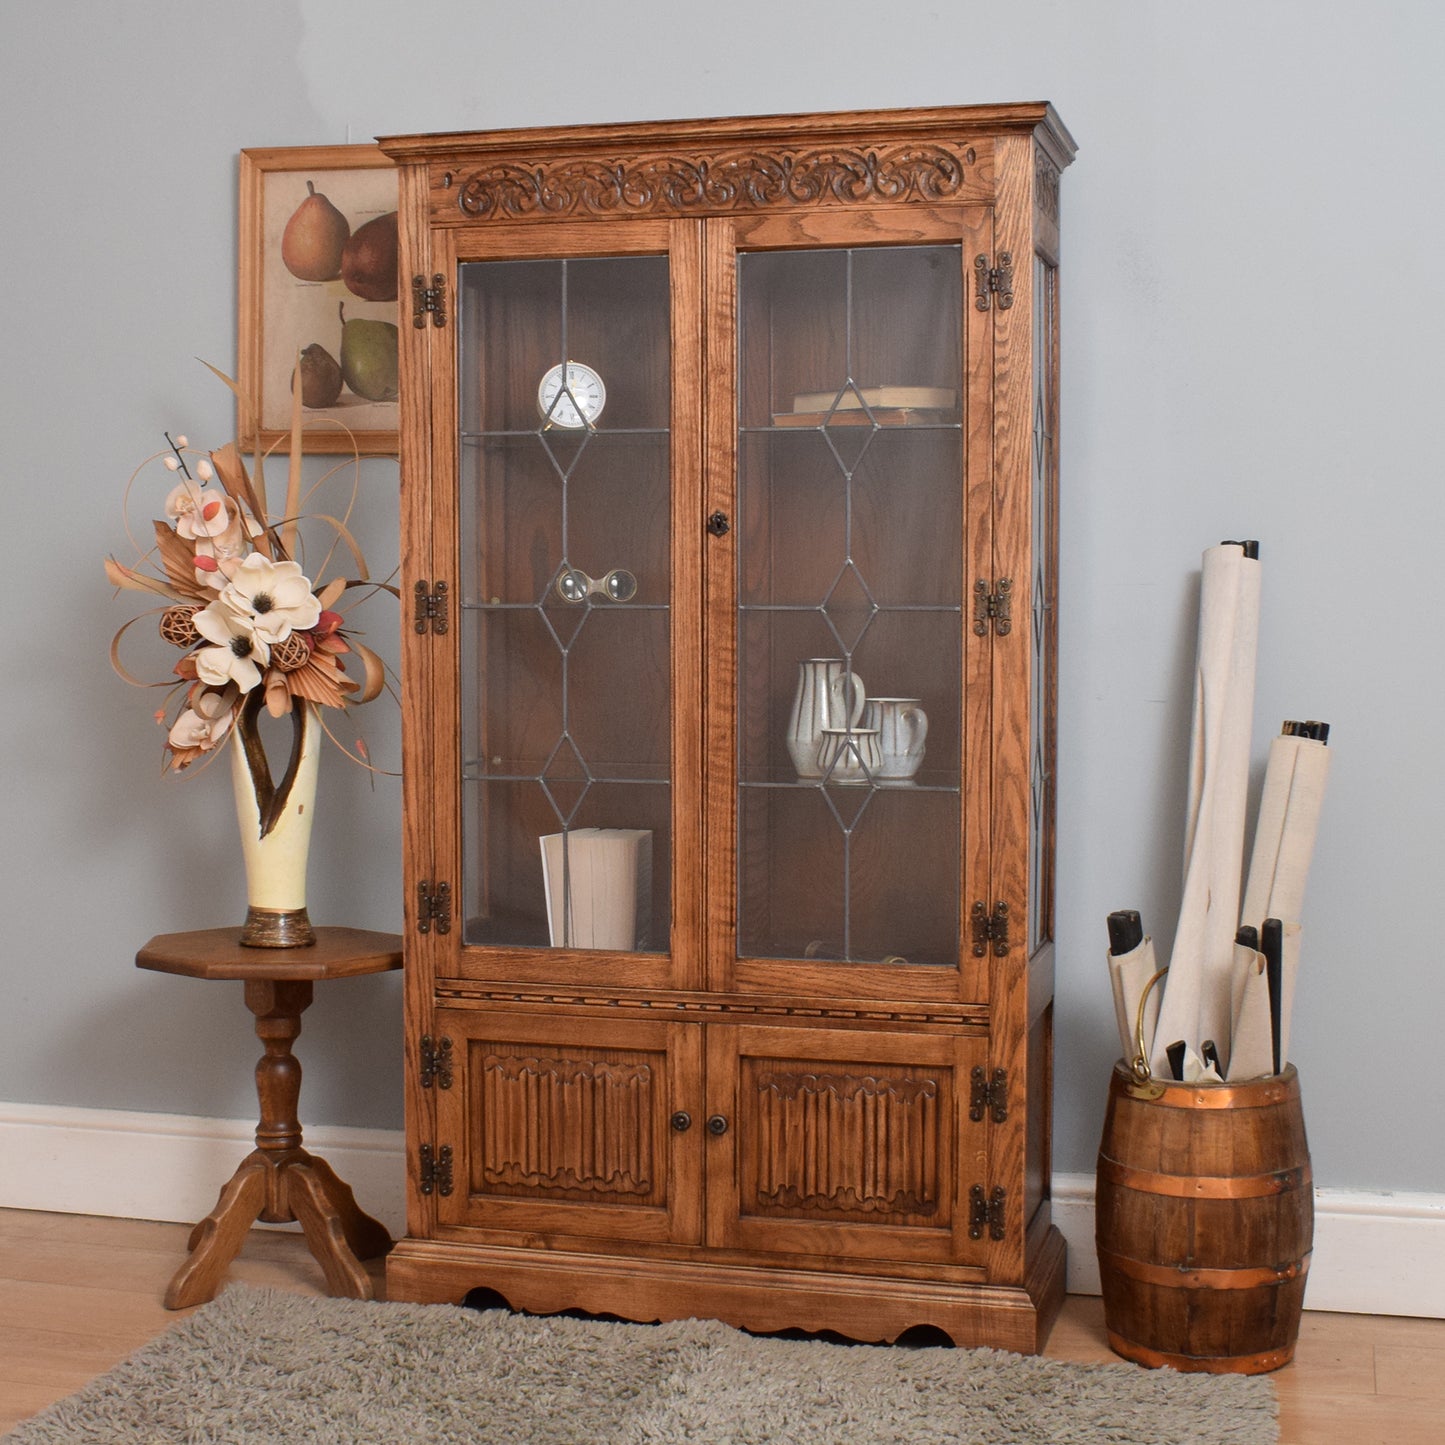 Restored Old Charm Glass Cabinet